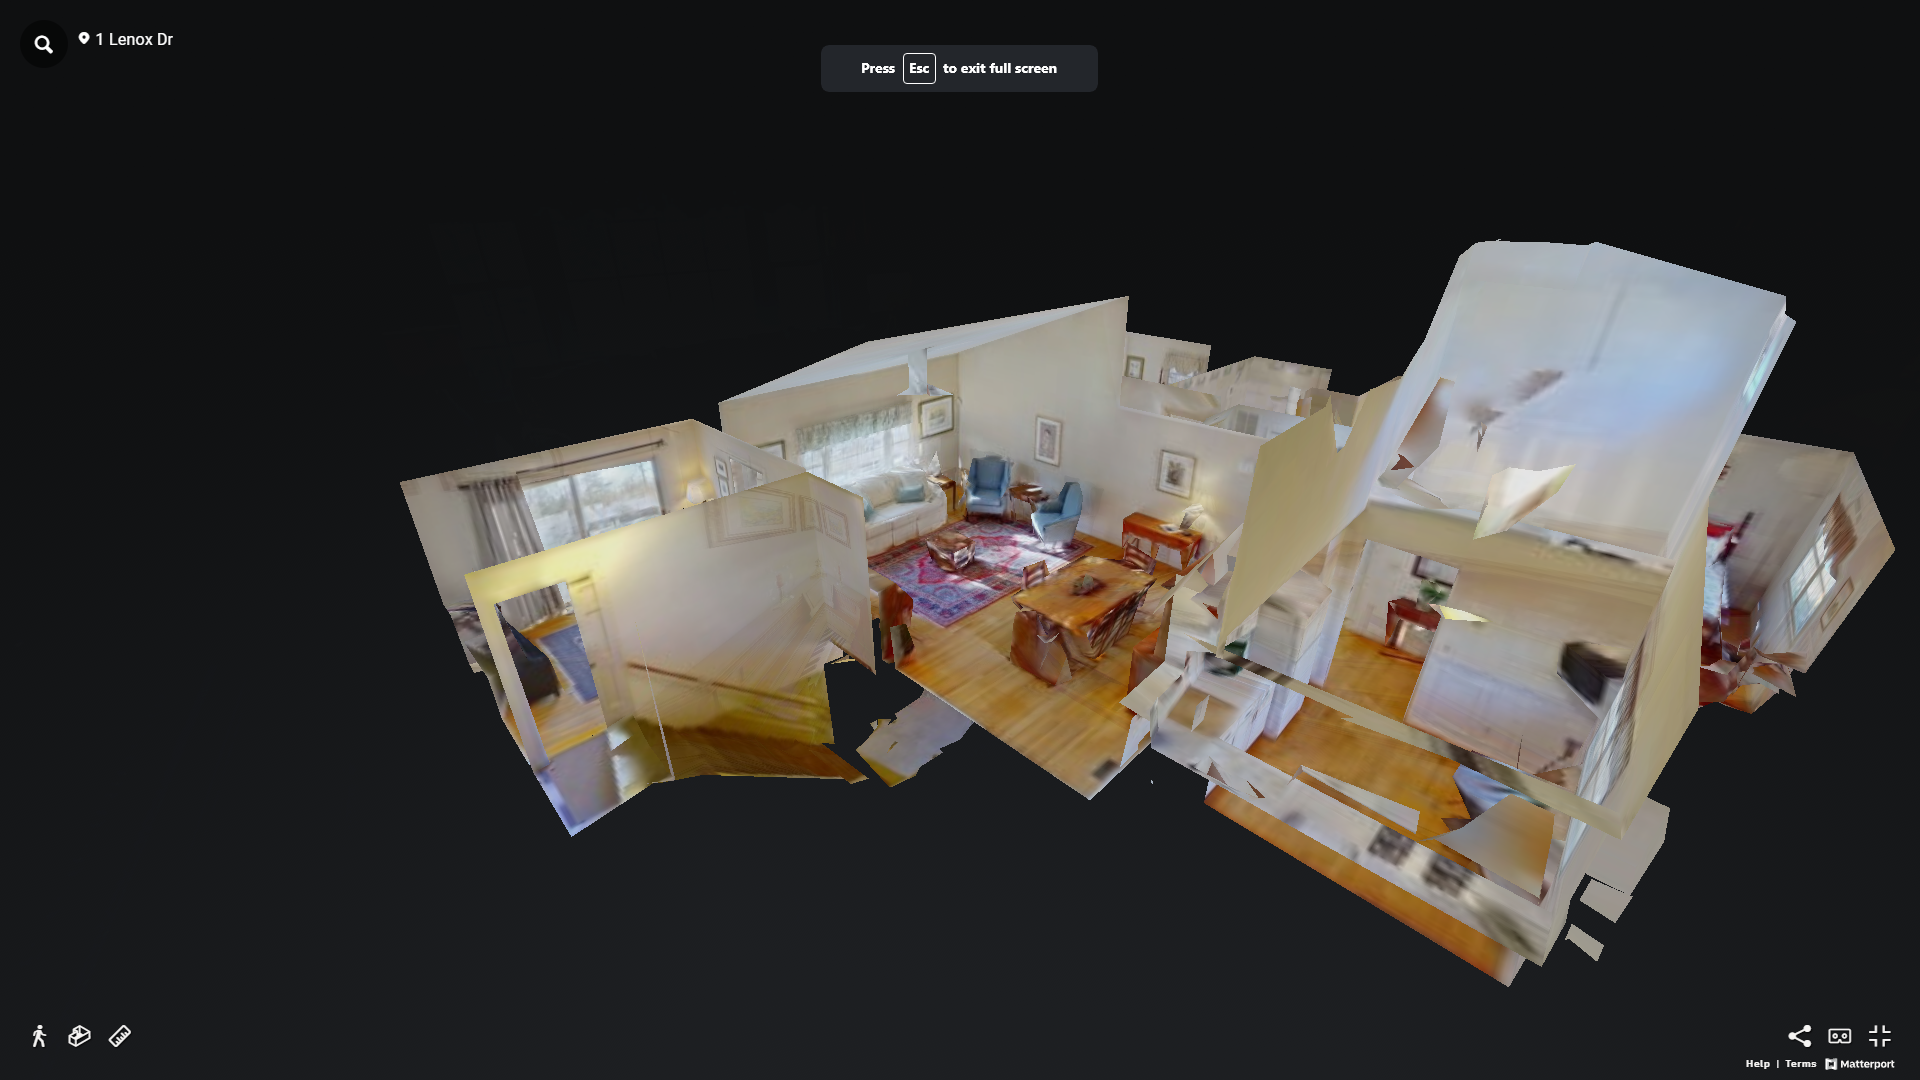 Enhancing Property Visibility For Real Estate Agents With 3D Tours